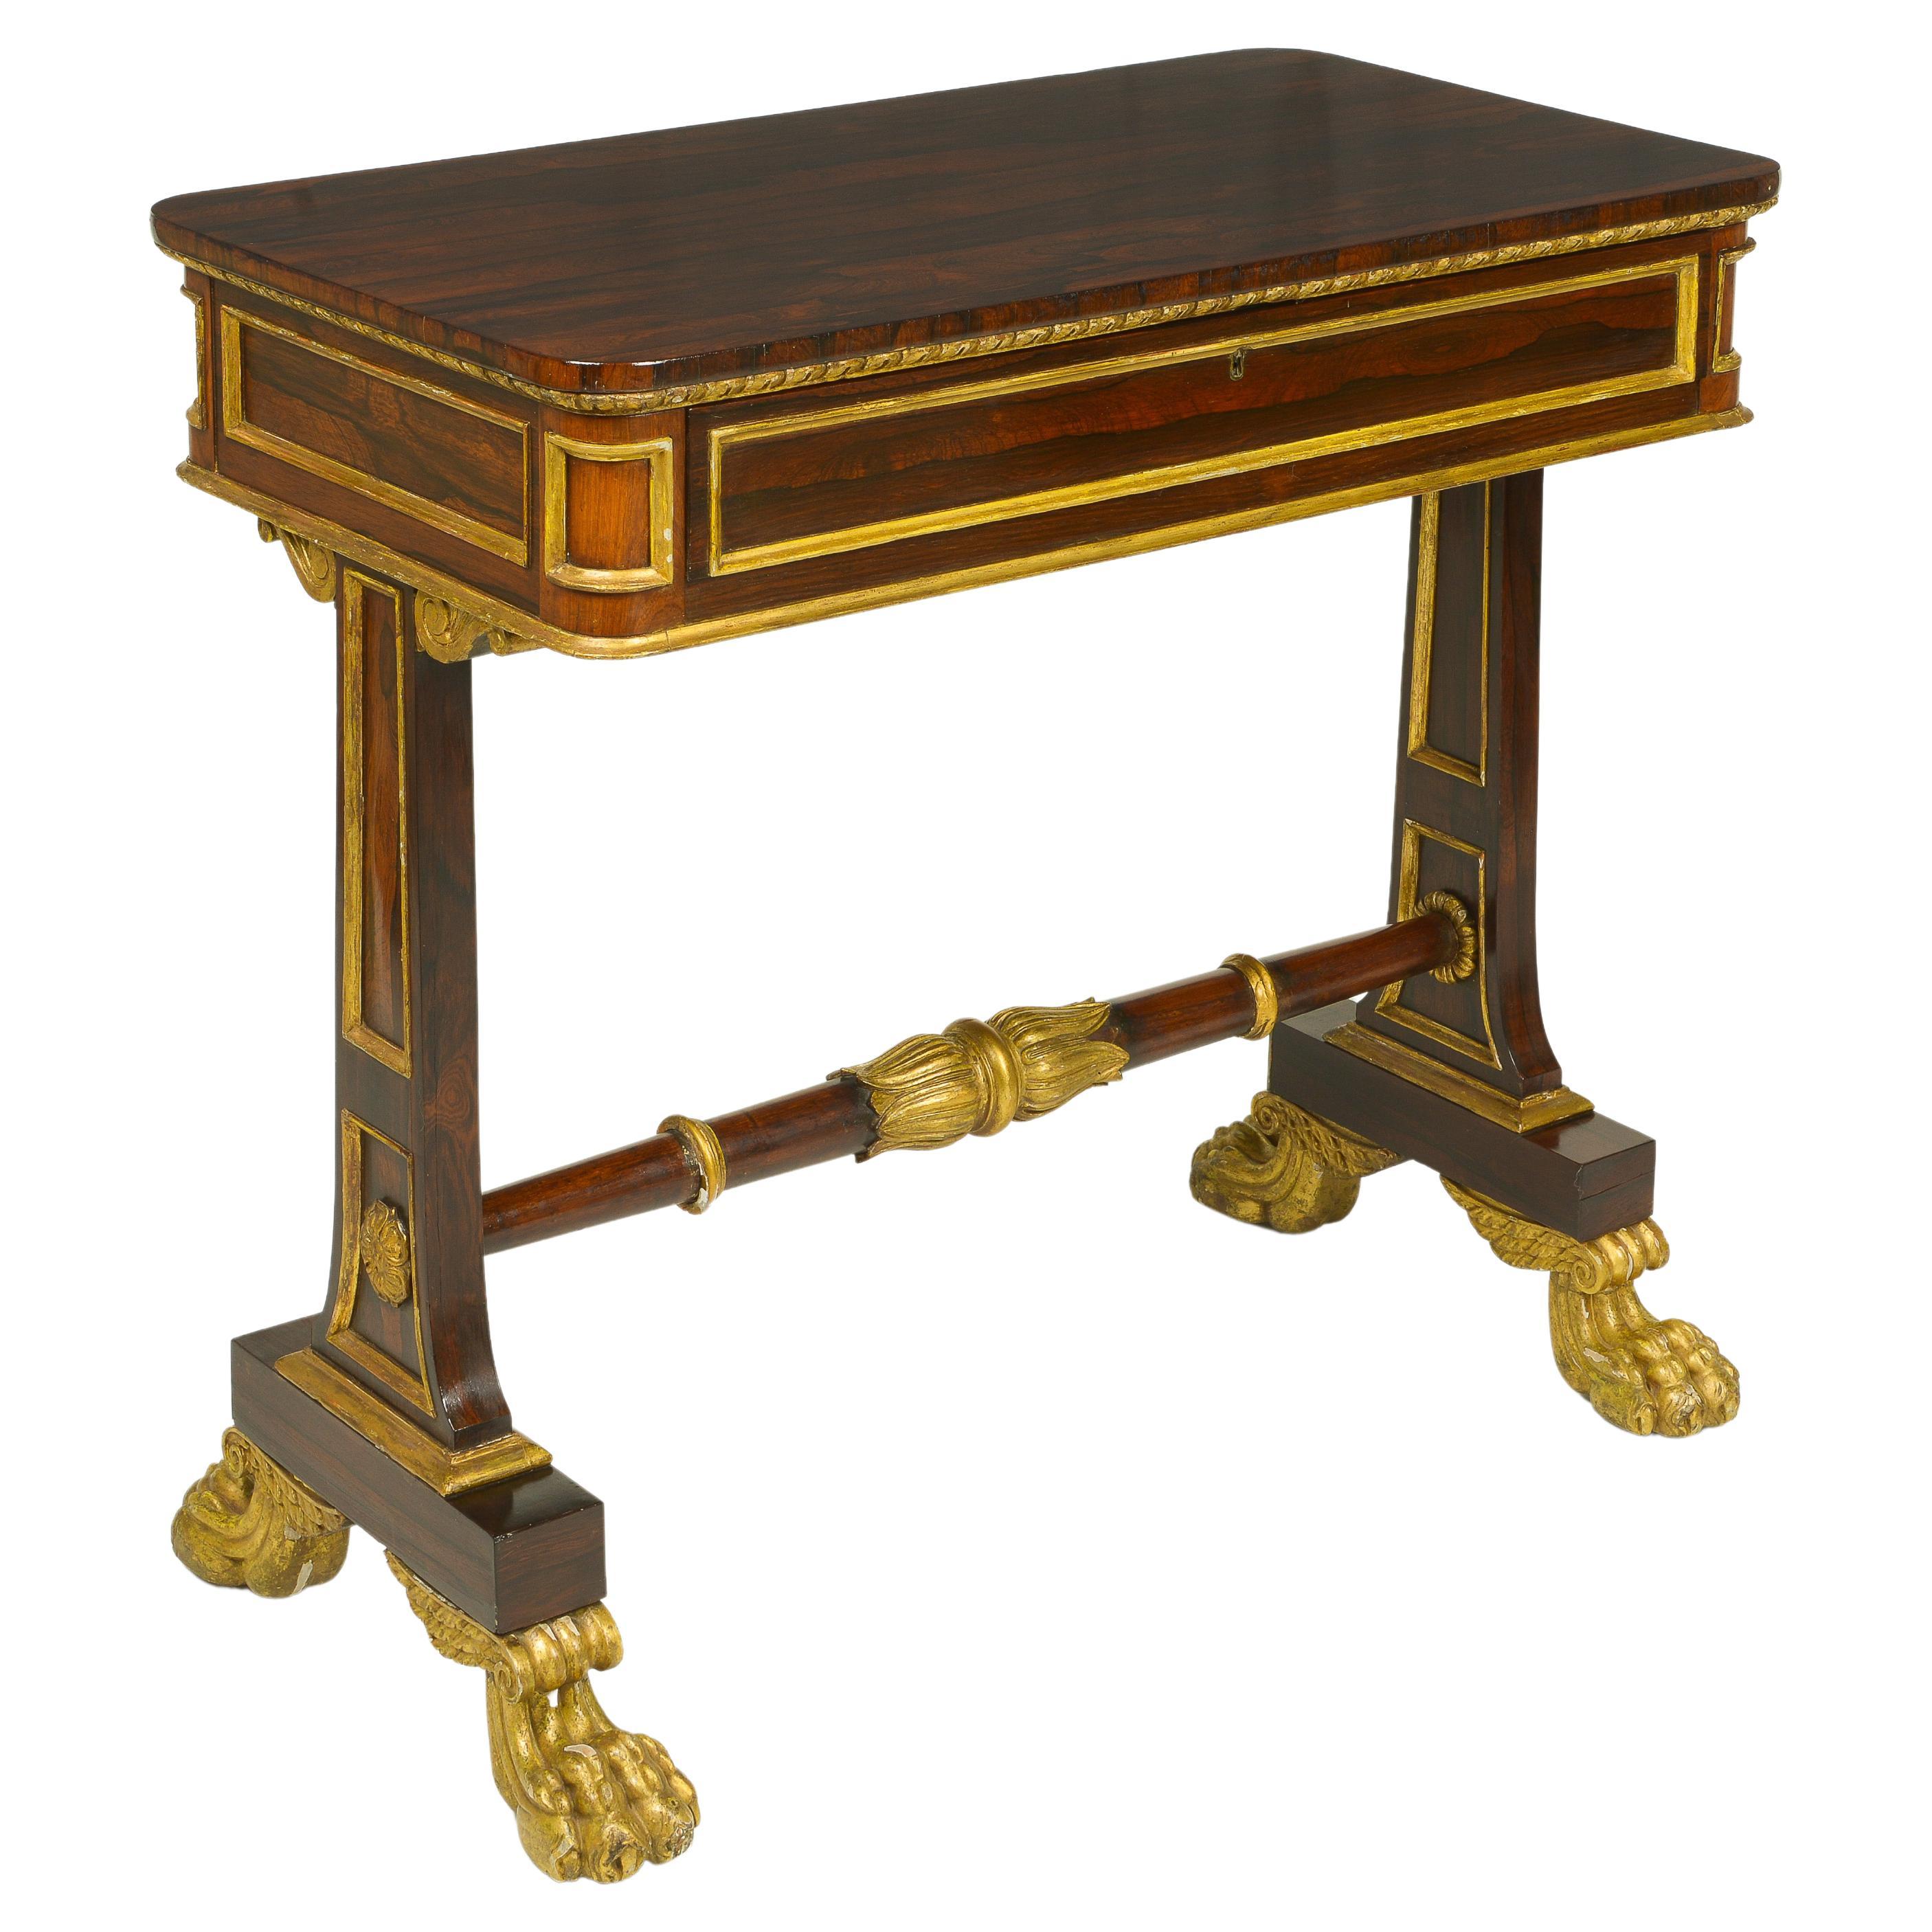 Regency Rosewood and Ormolu-Mounted Library Table